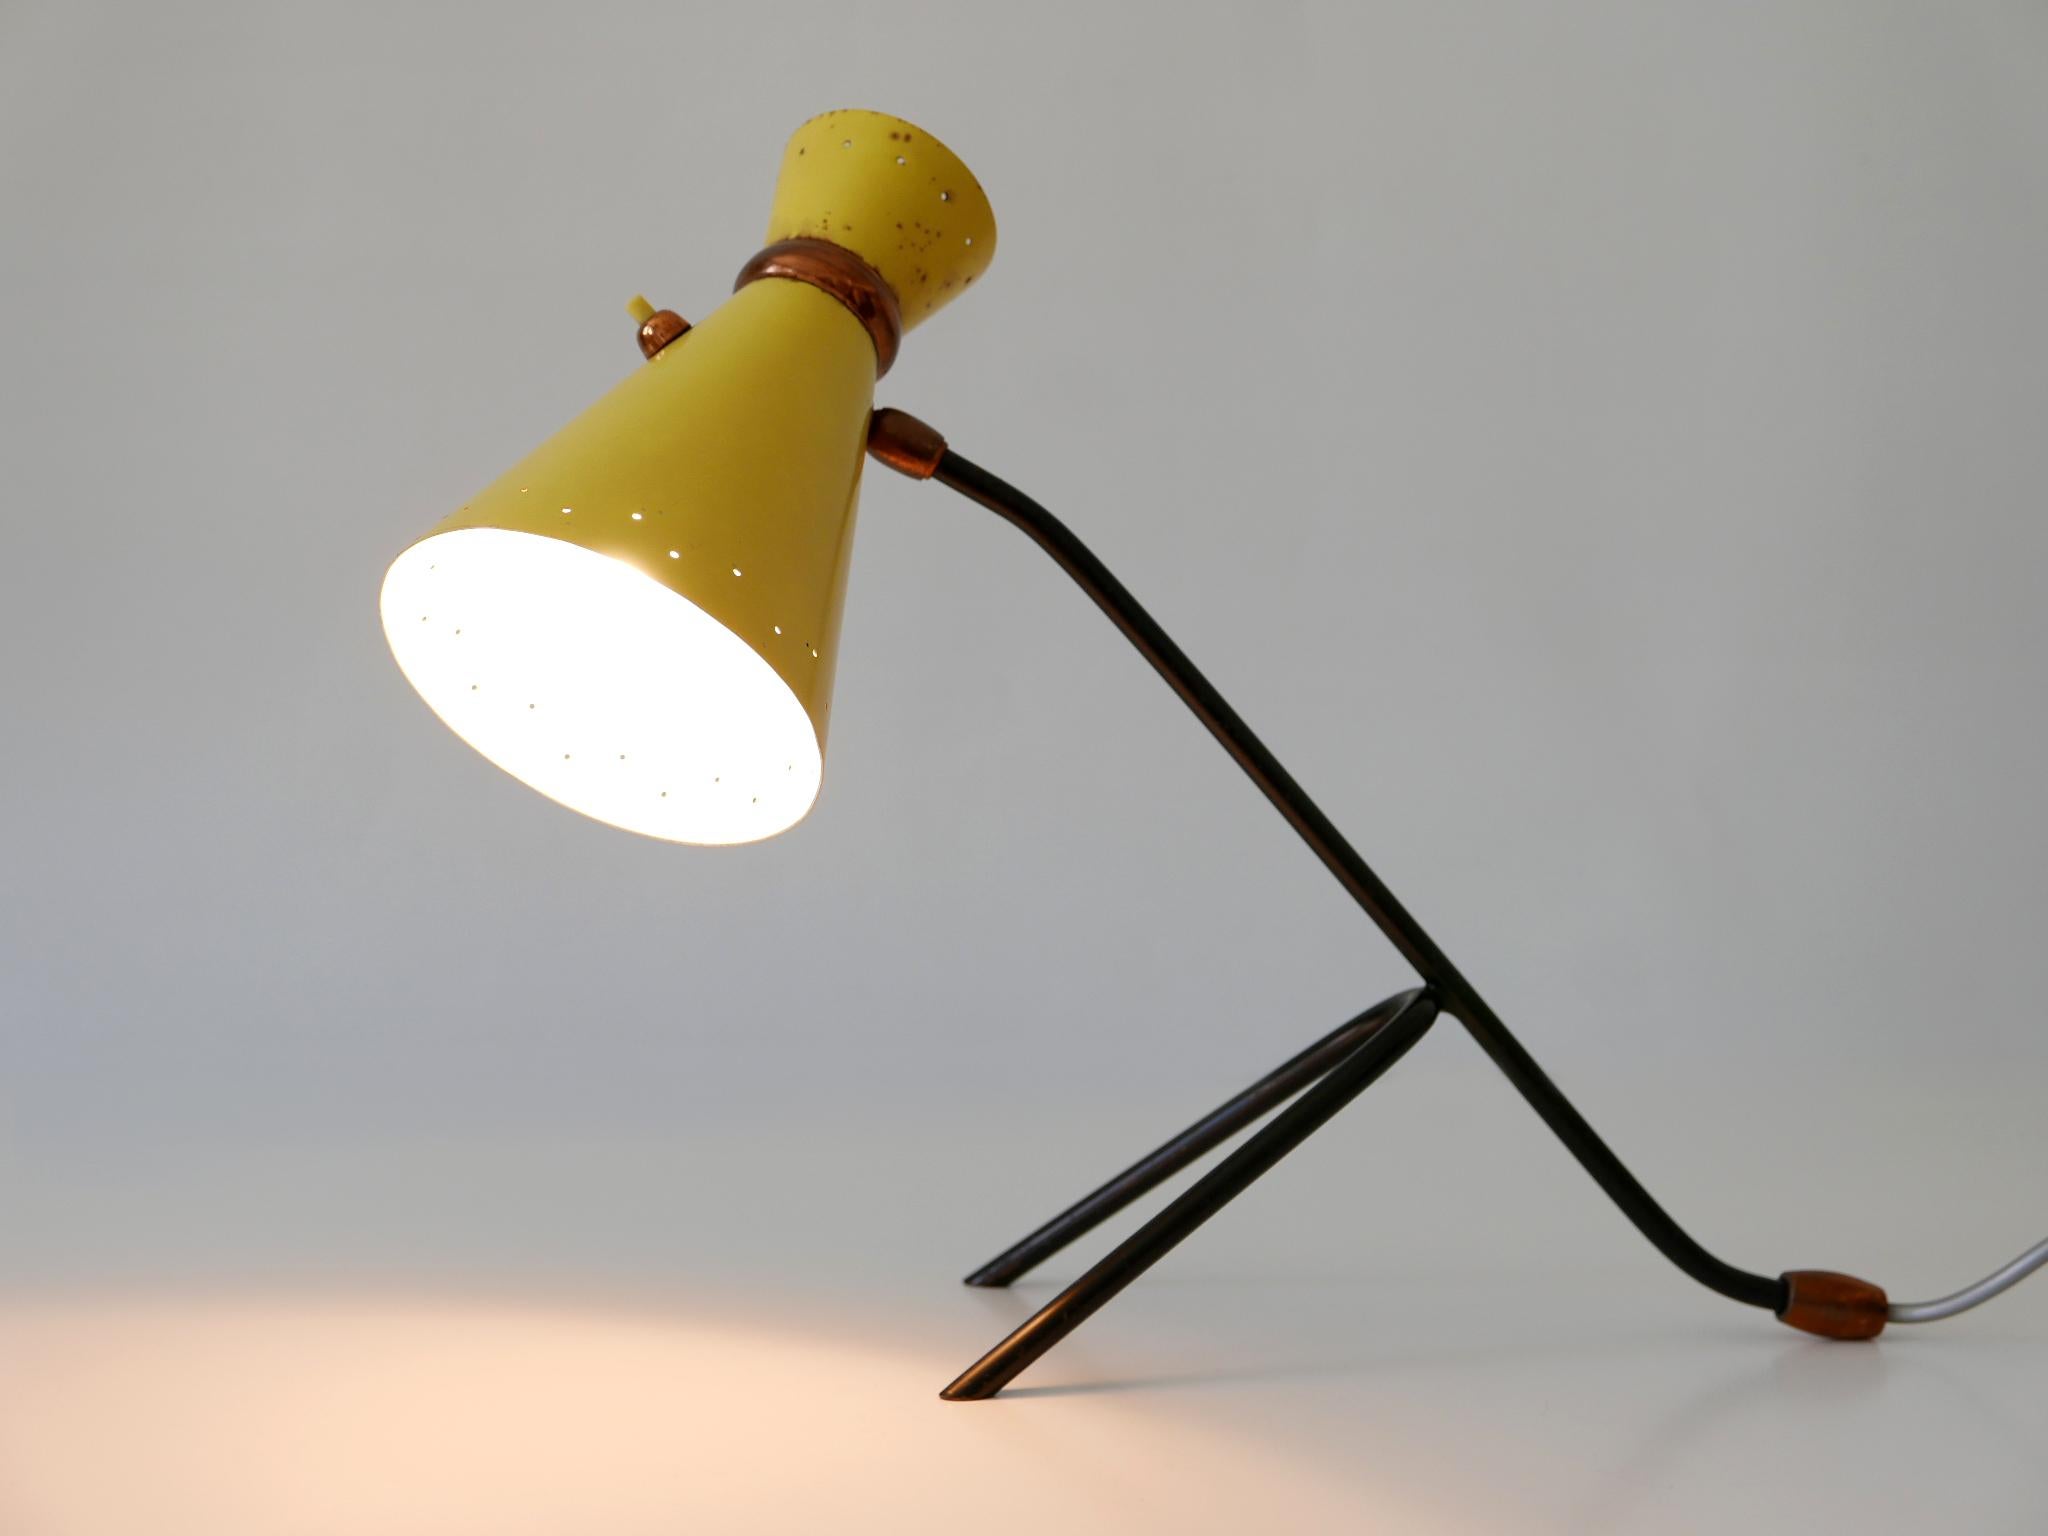 Extremely rare, highly decorative and articulated Mid-Century Modern diabolo table lamp or desk light. Due to the joint ball, the lamp shade can be adjusted in various positions. Designed & manufactured probably in Italy, 1960s.

Executed in yellow